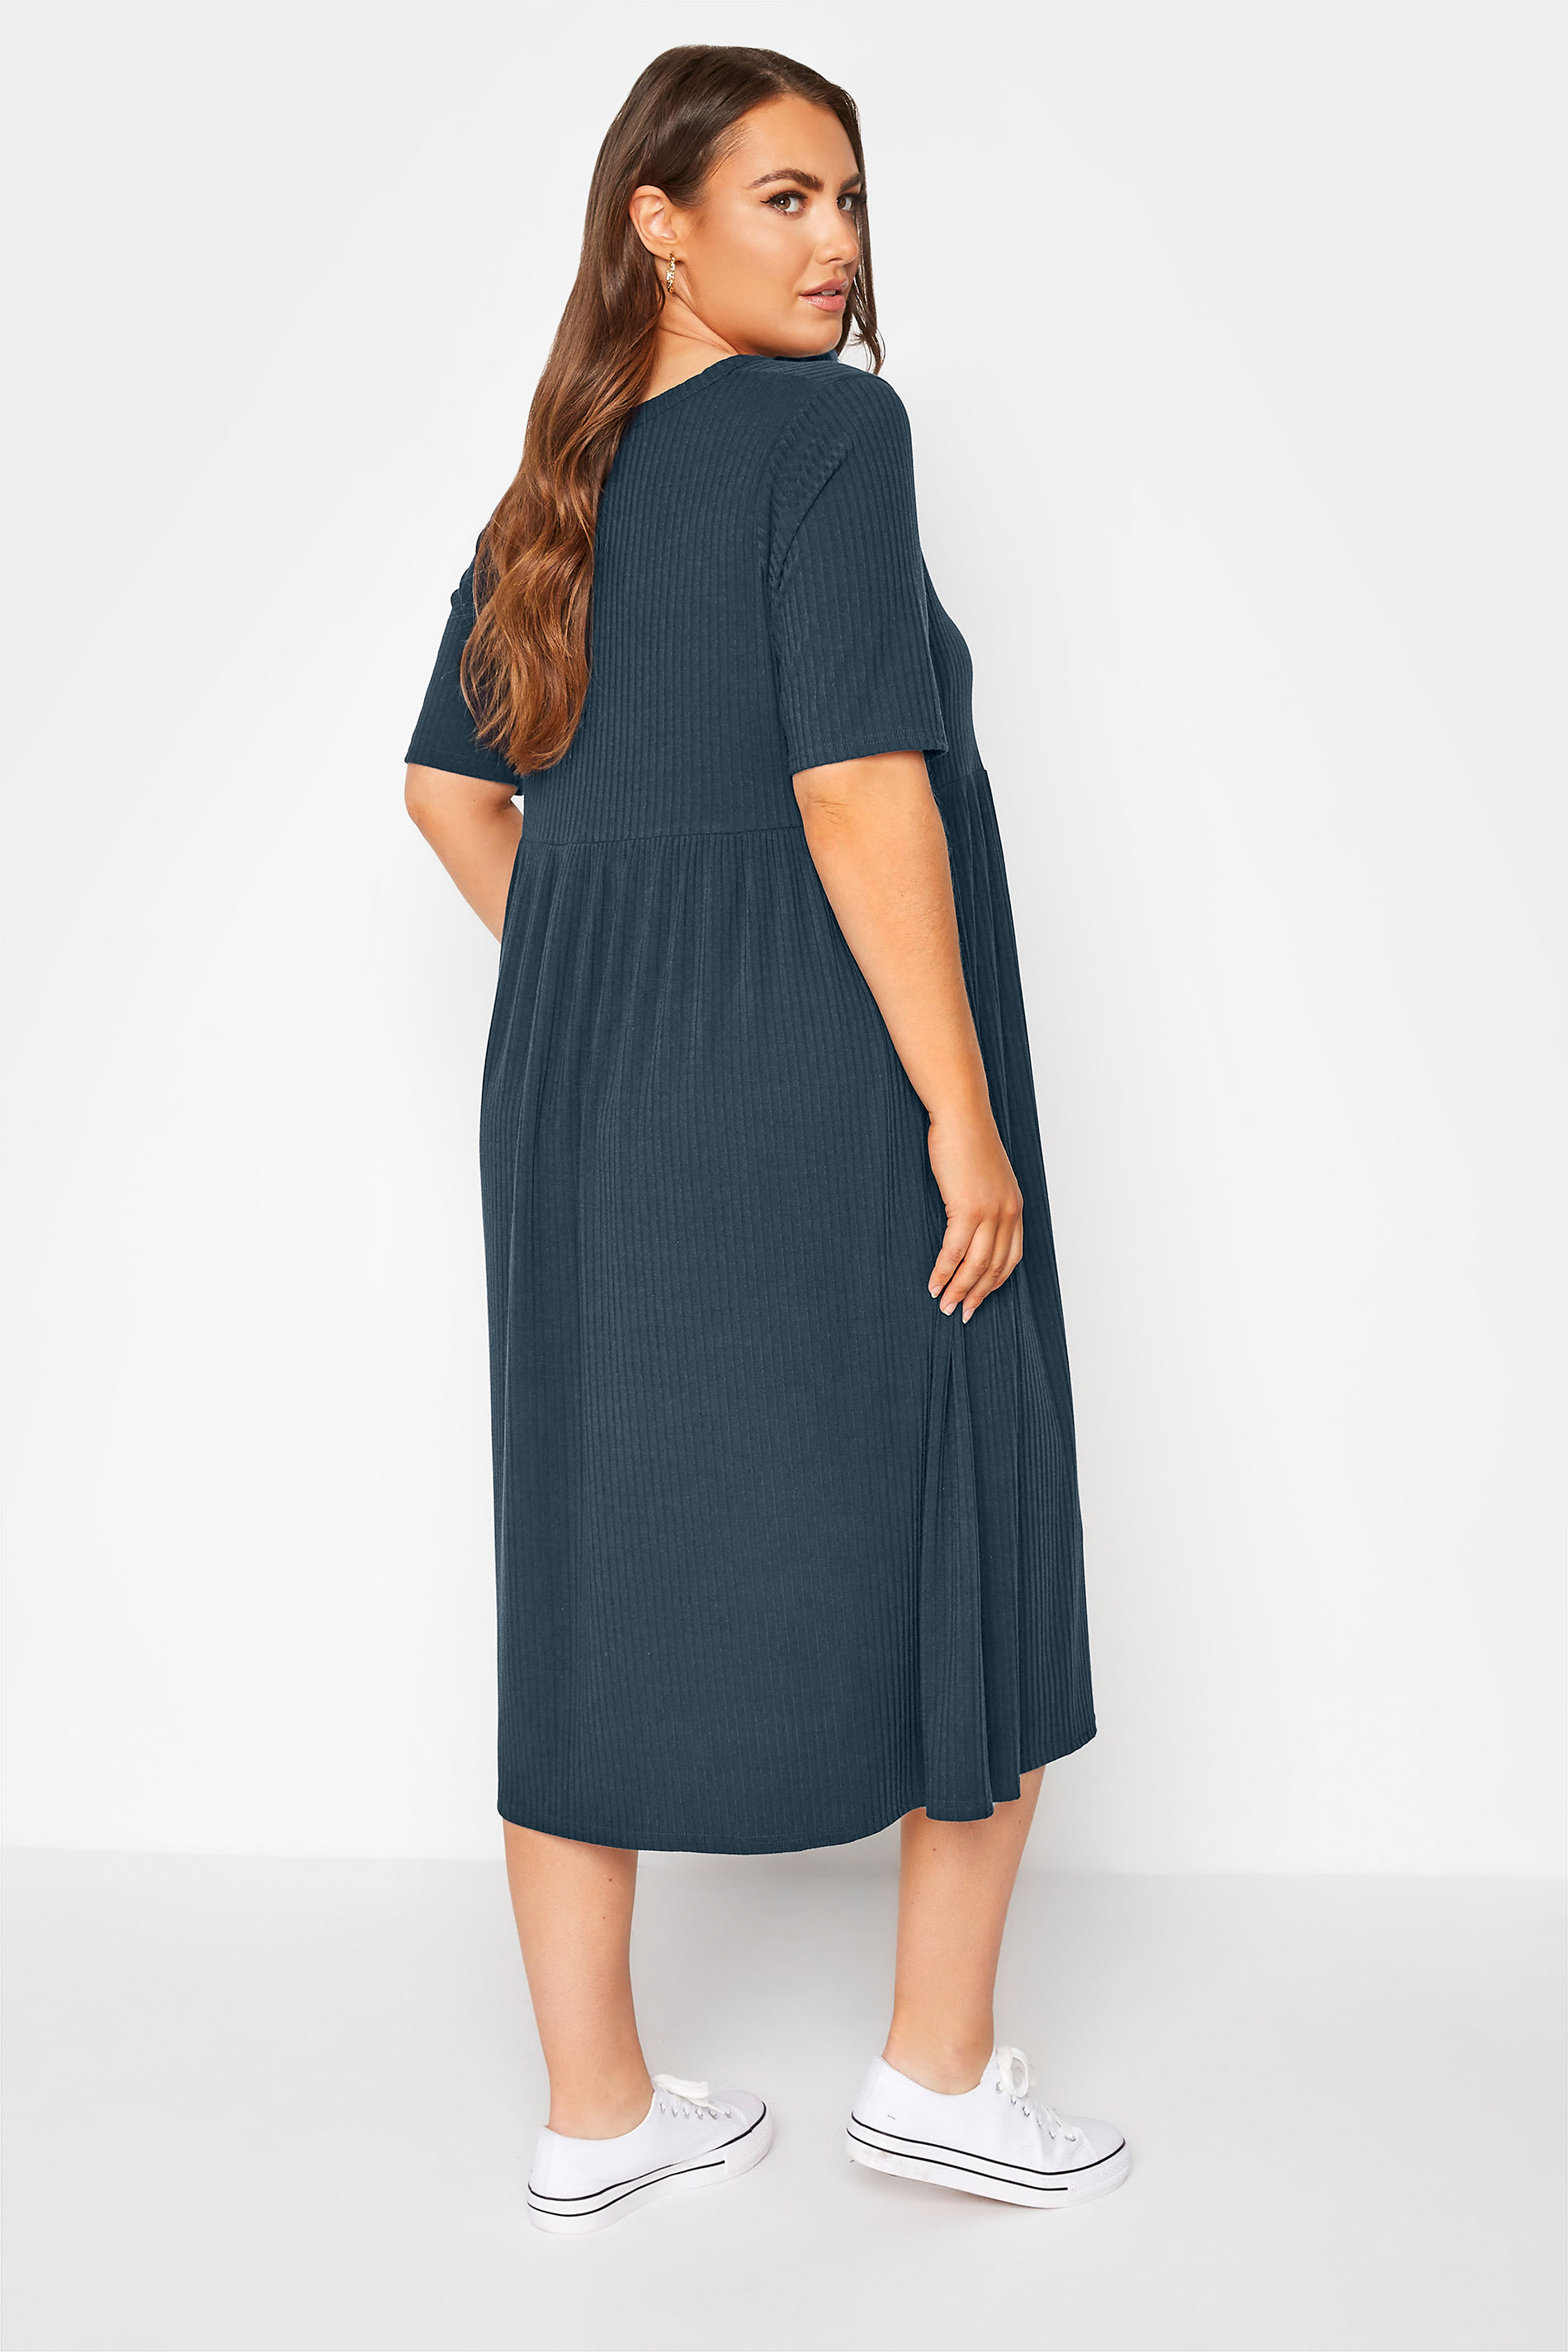 LIMITED COLLECTION Plus Size Navy Blue Ribbed Peplum Midi Dress | Yours Clothing 3